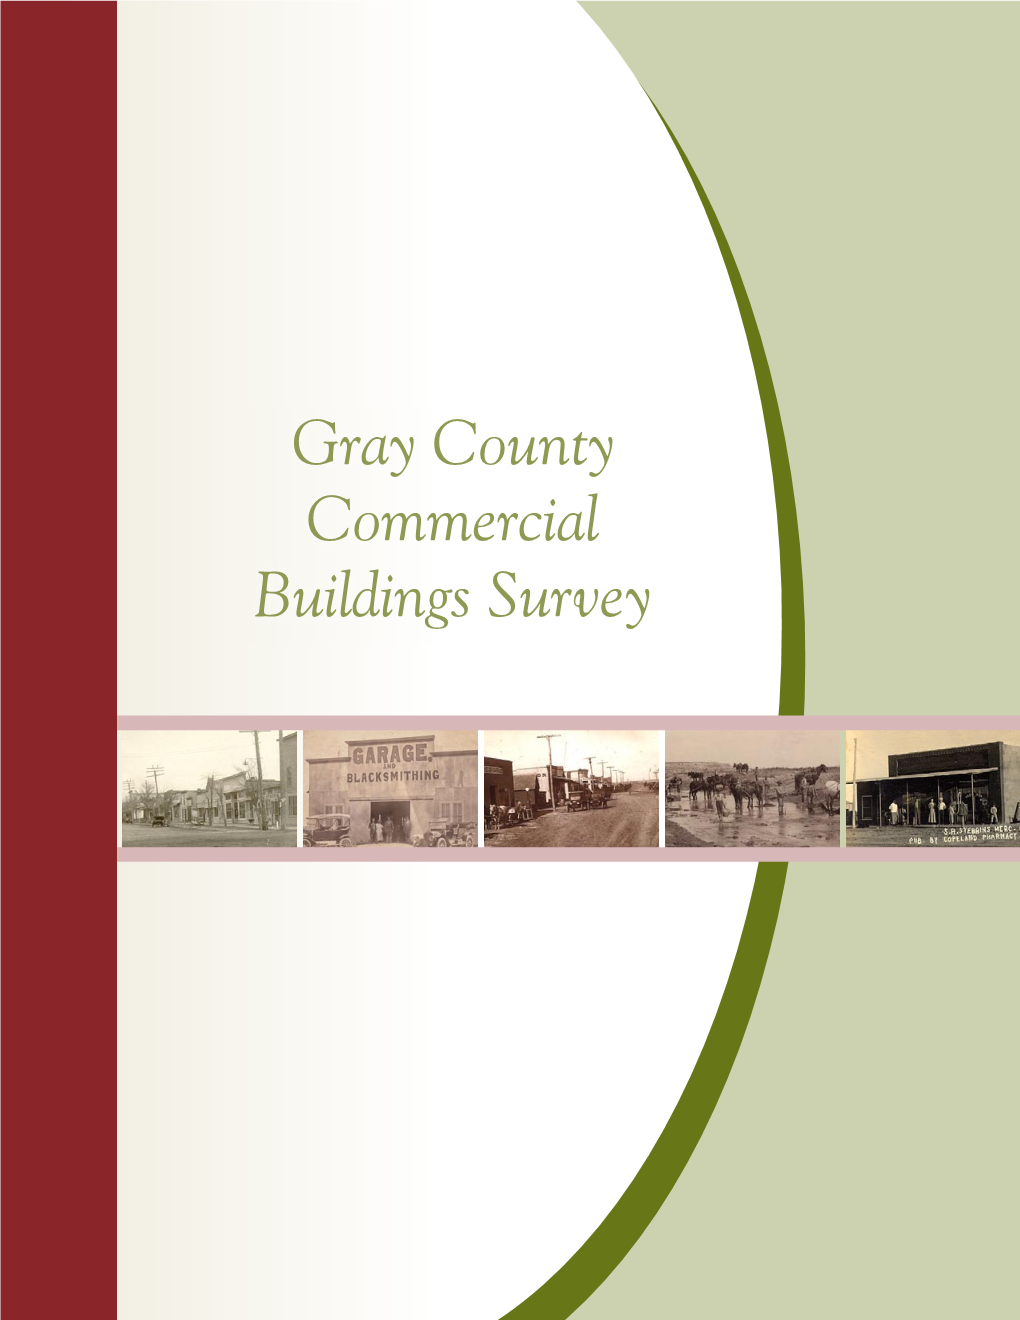 Gray County Commercial Buildings Survey